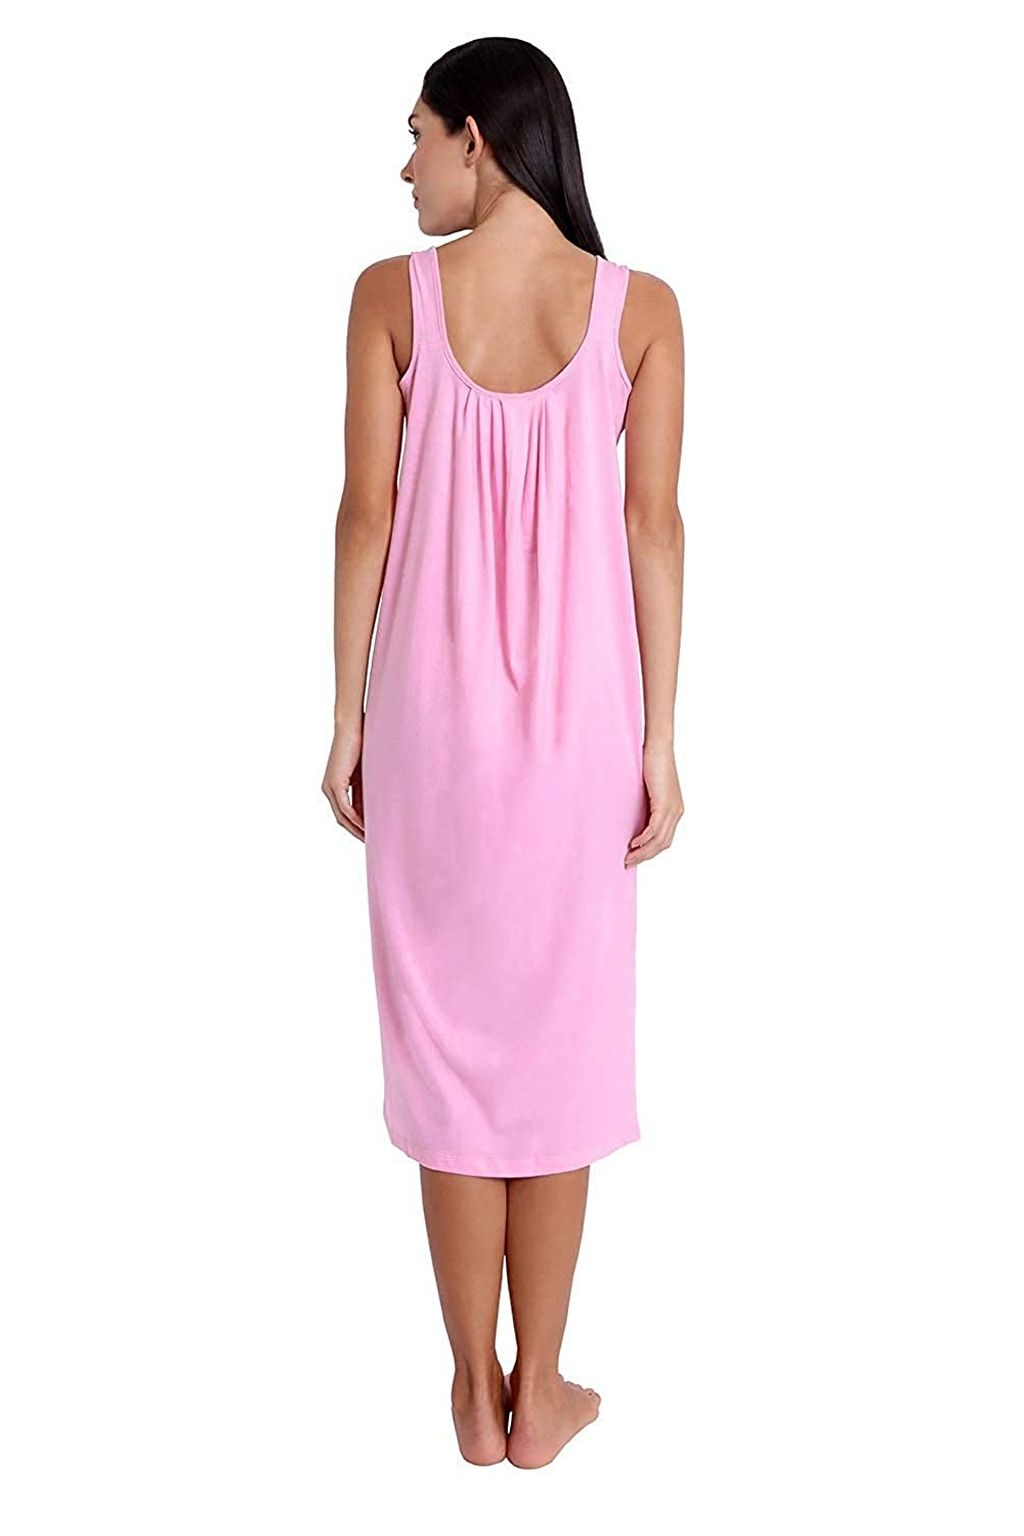 224 - Pink Cotton Full Length Camisole for Women - Long Inner wear